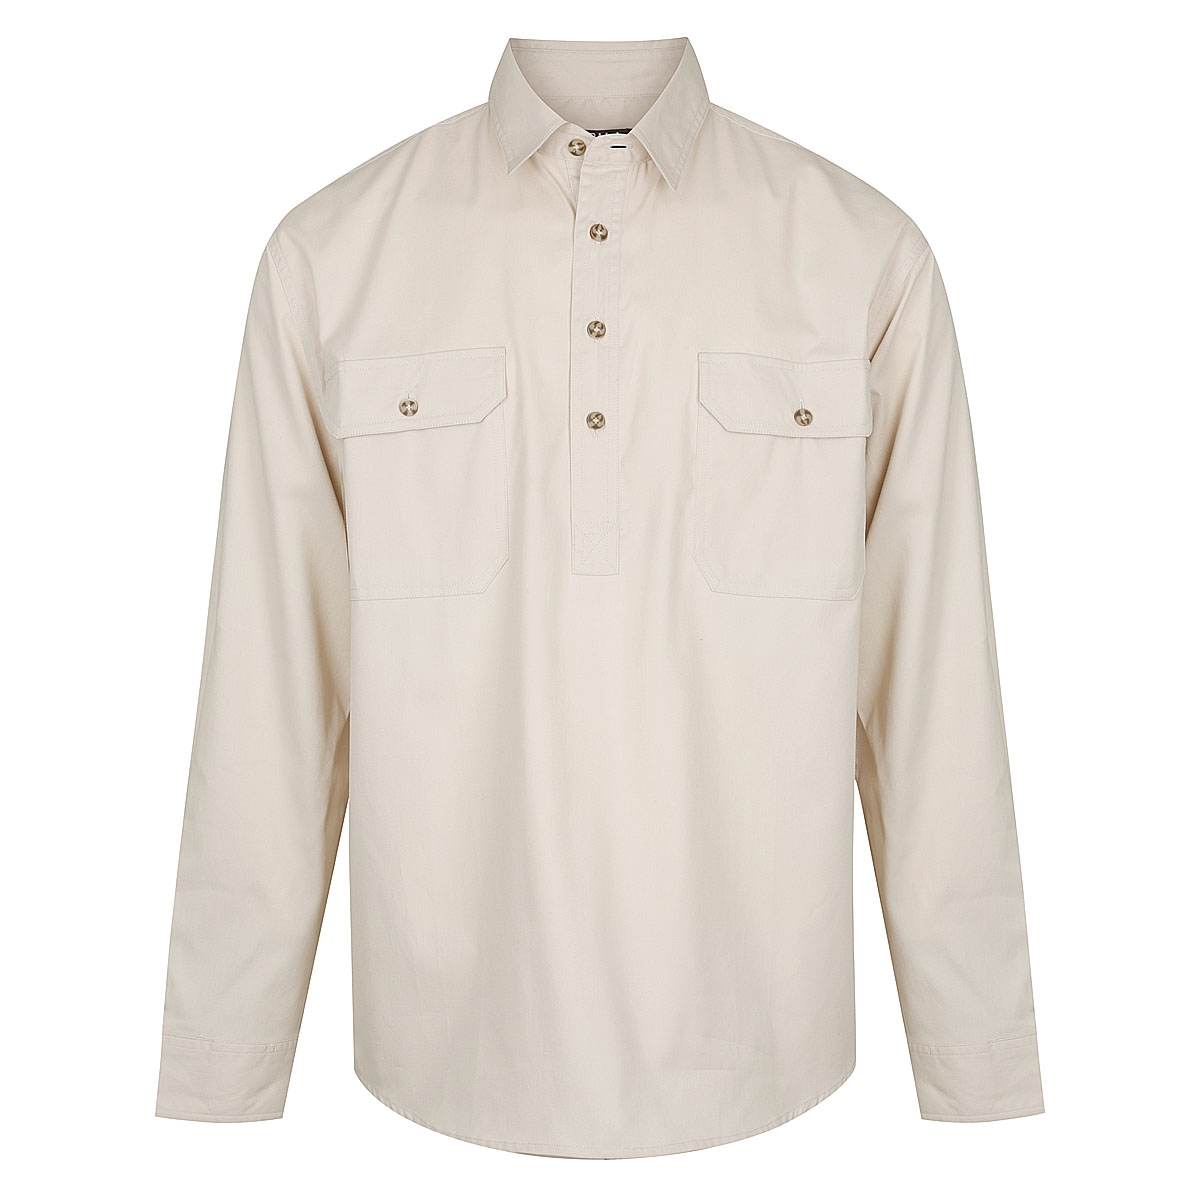 Men’s ½ Button L/S Work Shirt - Outback Whips & Leather